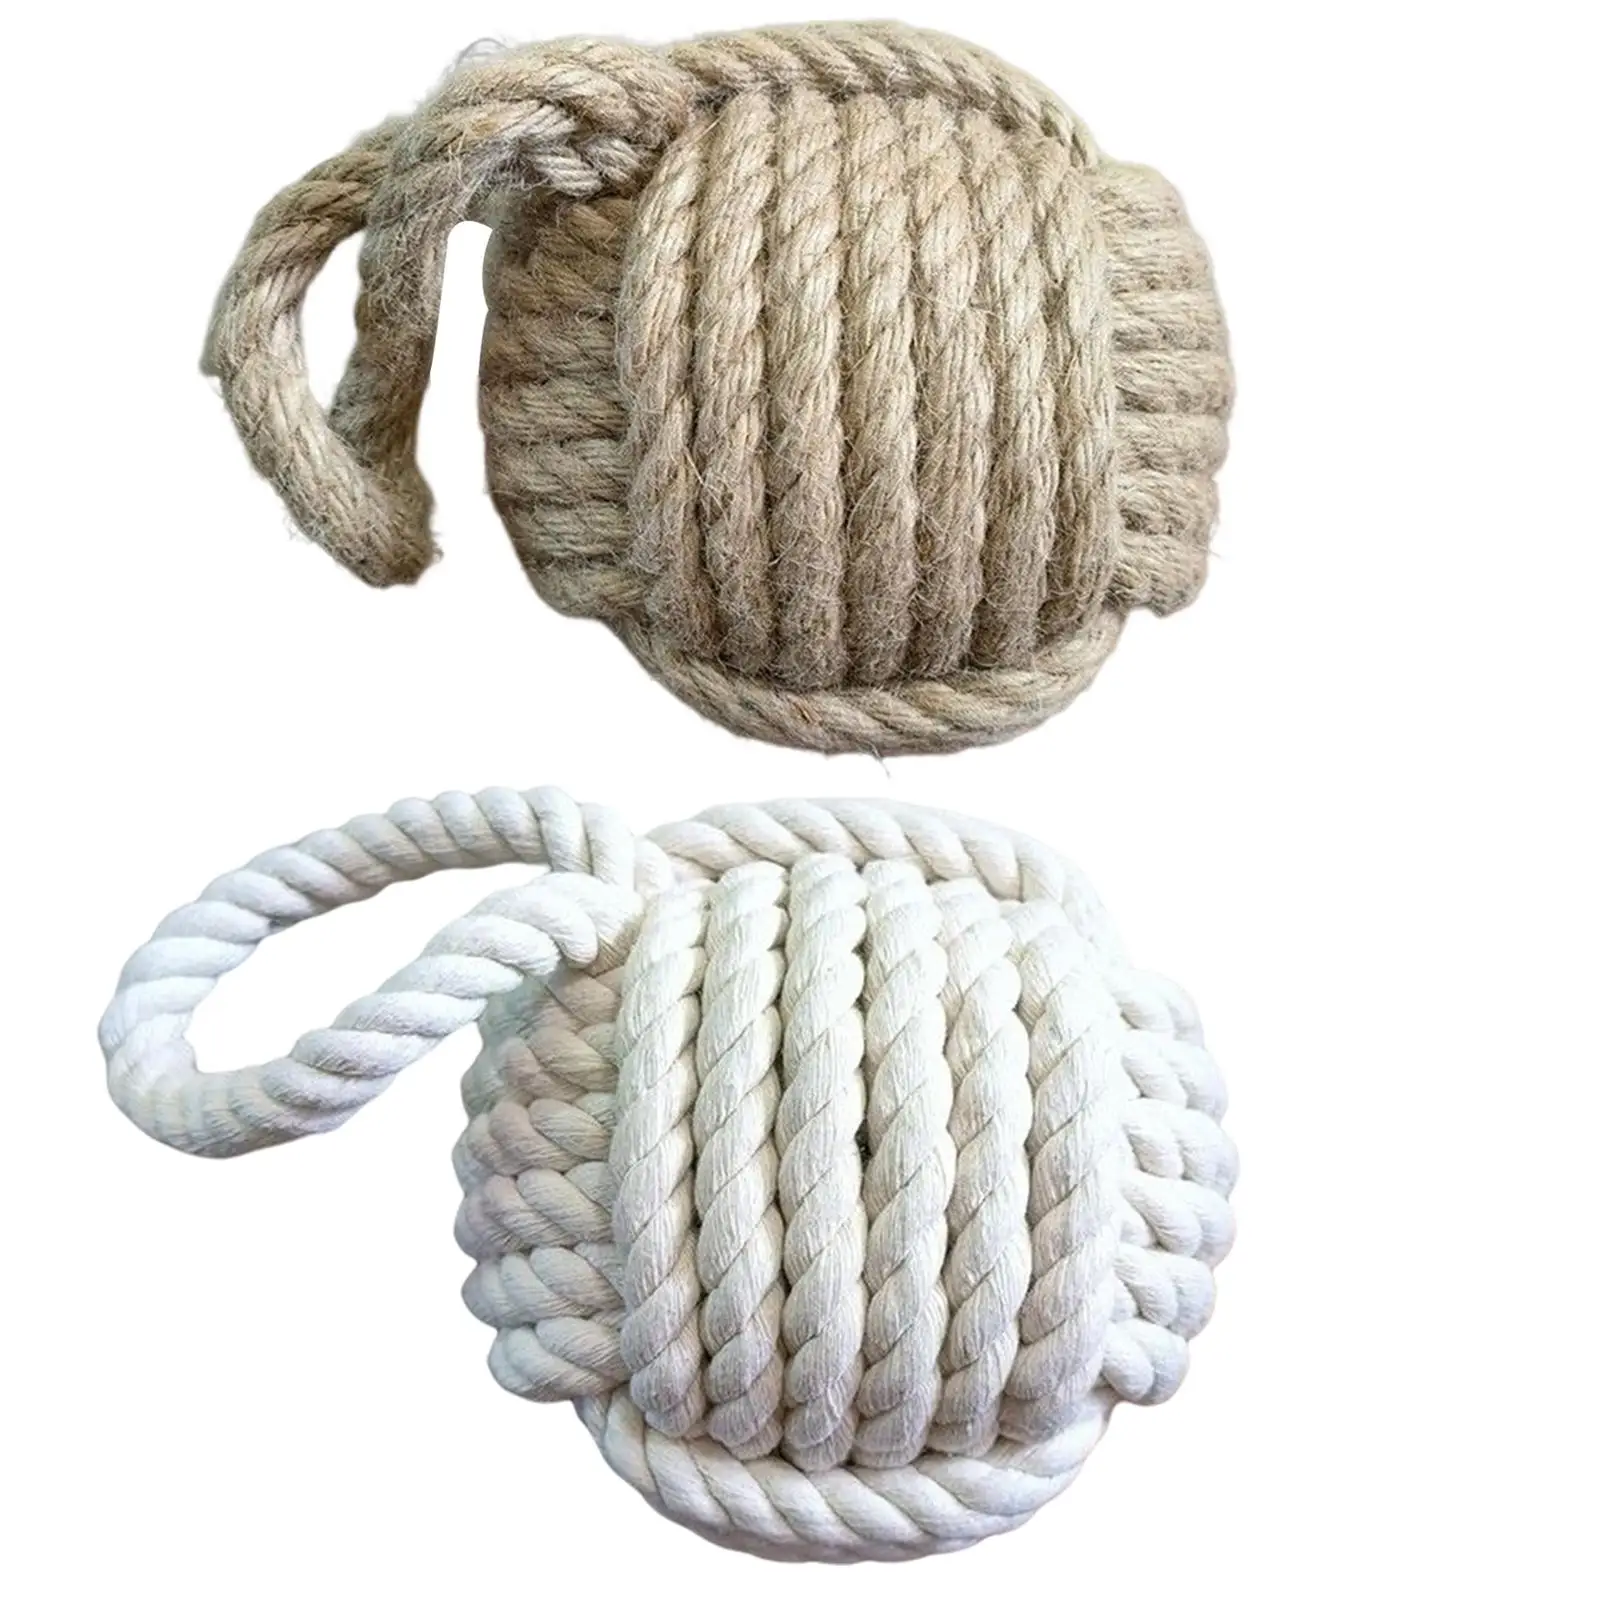 

Rope Knot Door Stop Sailors Knot Boat Decor Novelty Nautical Rope Knot for Bedroom